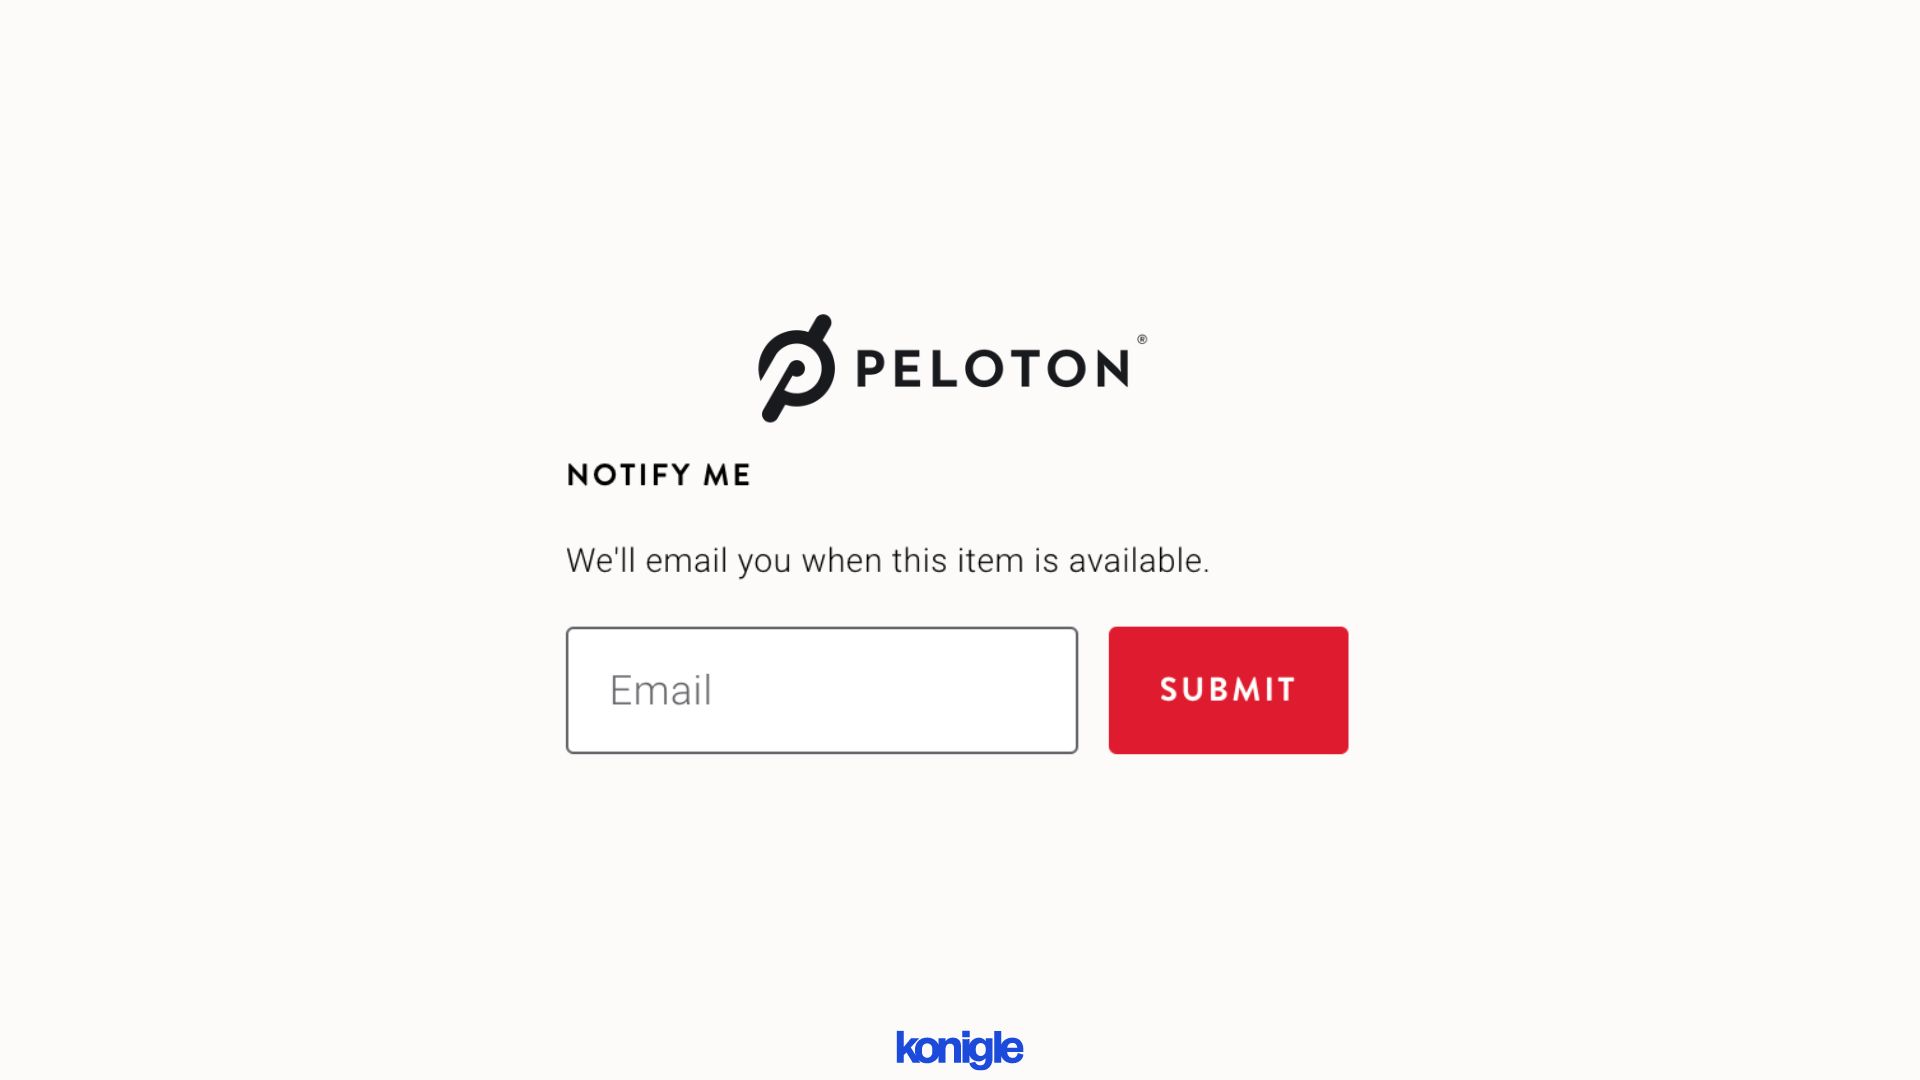 Peloton out of stock tactic